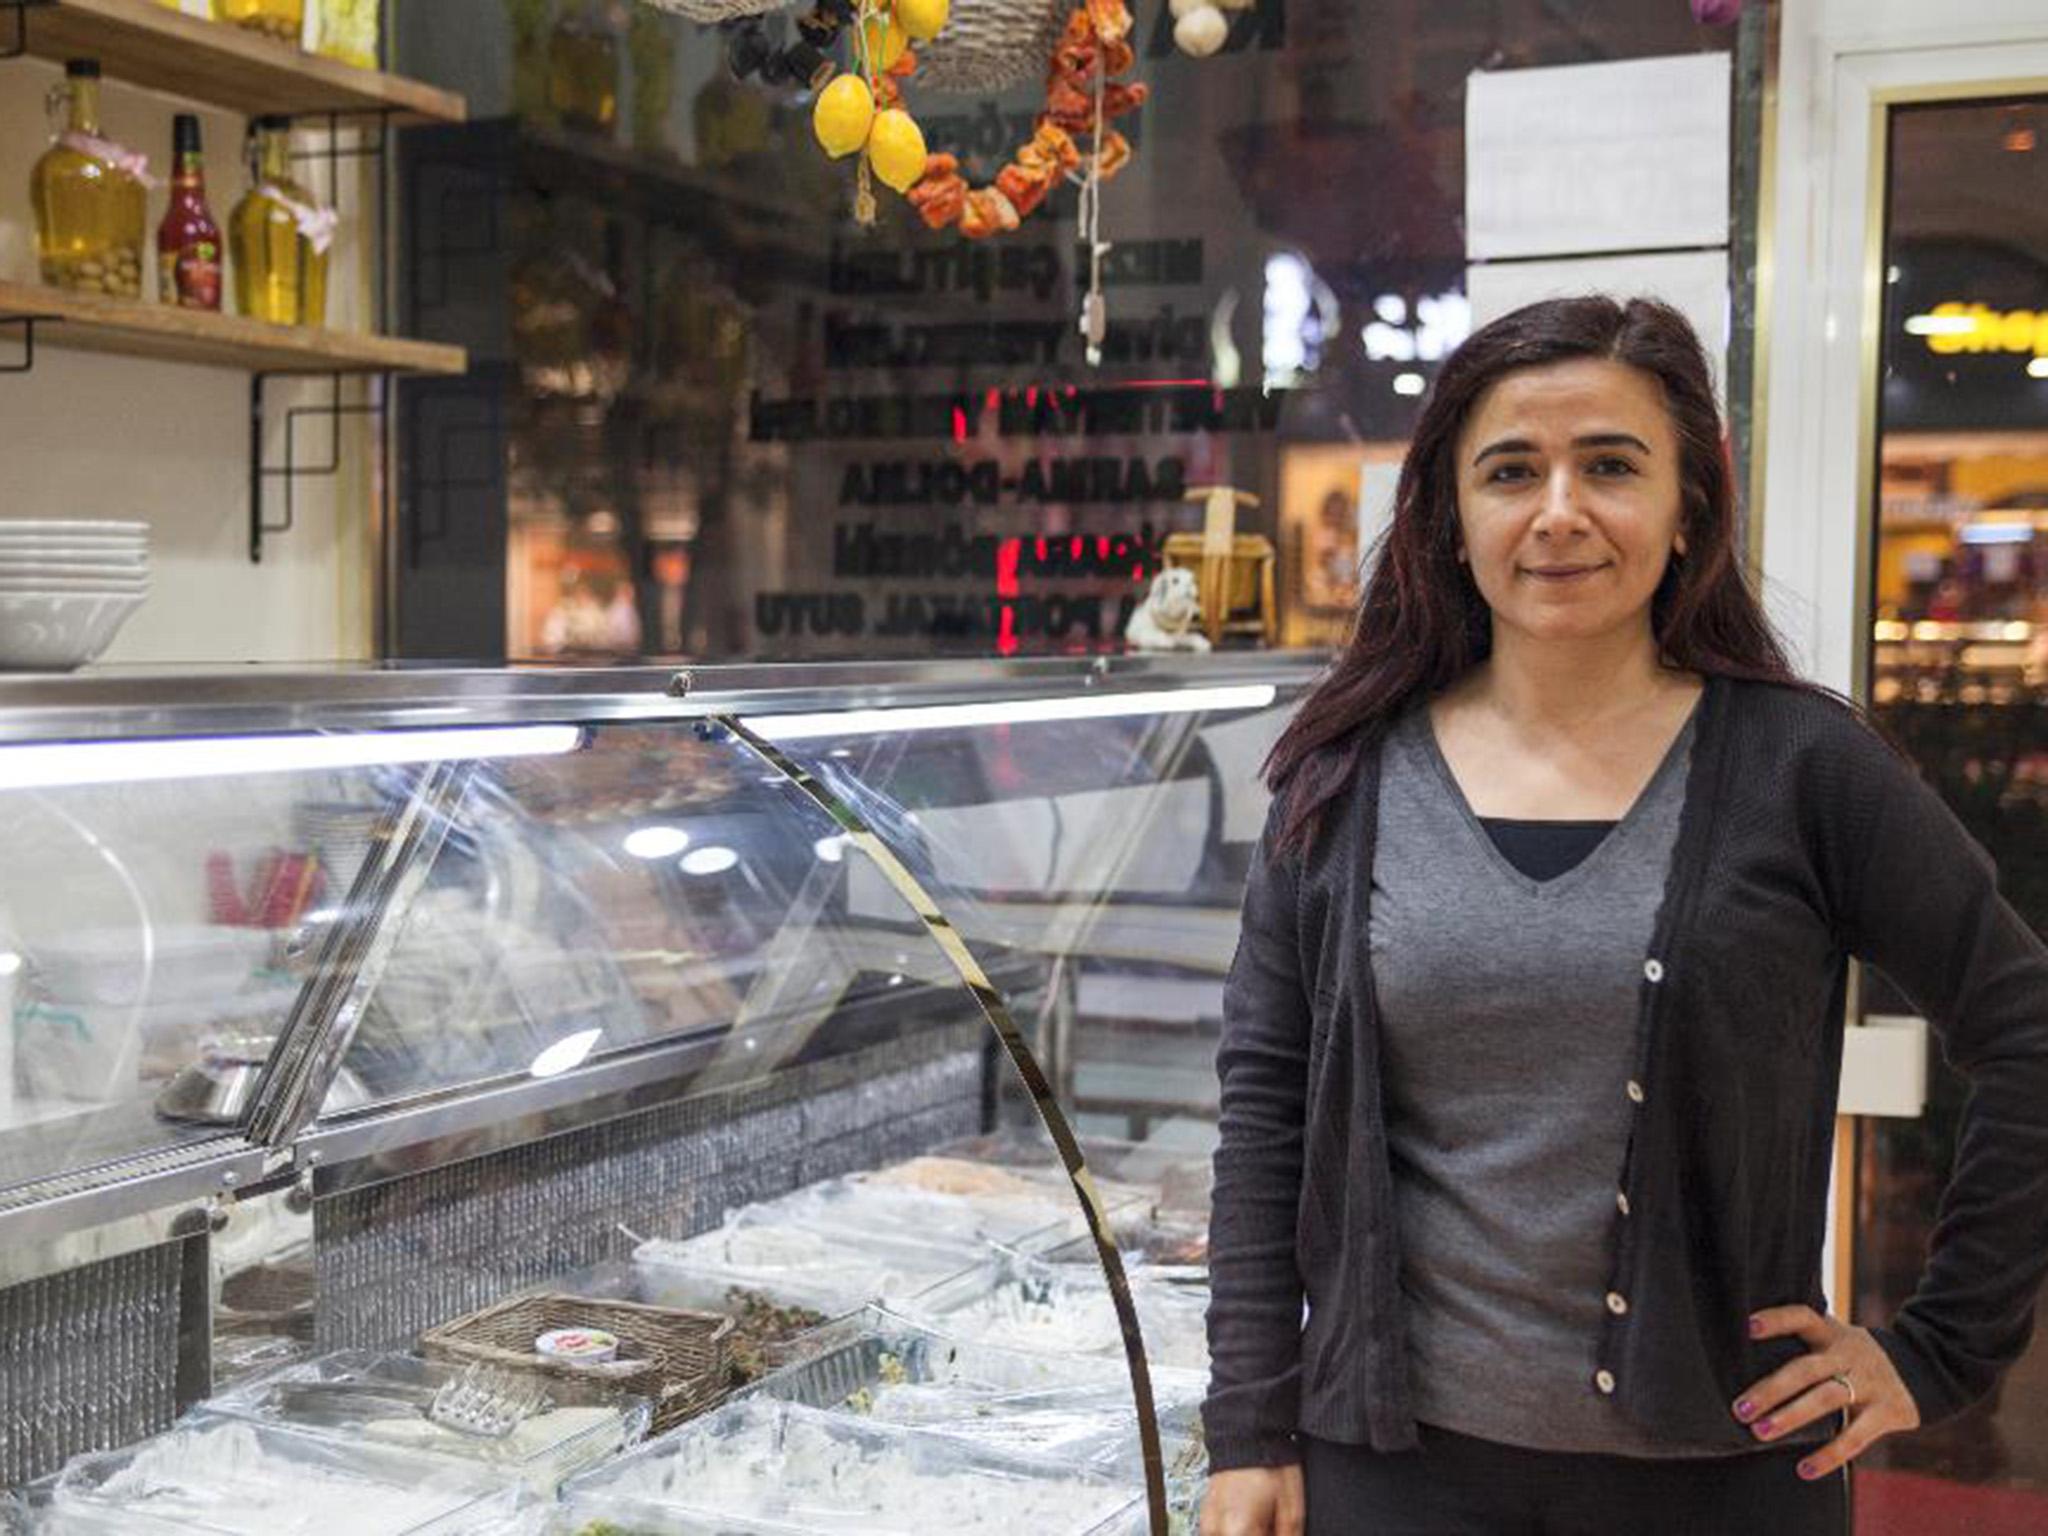 Serap Kılıç never thought she would be able to work such long hours or run her own business